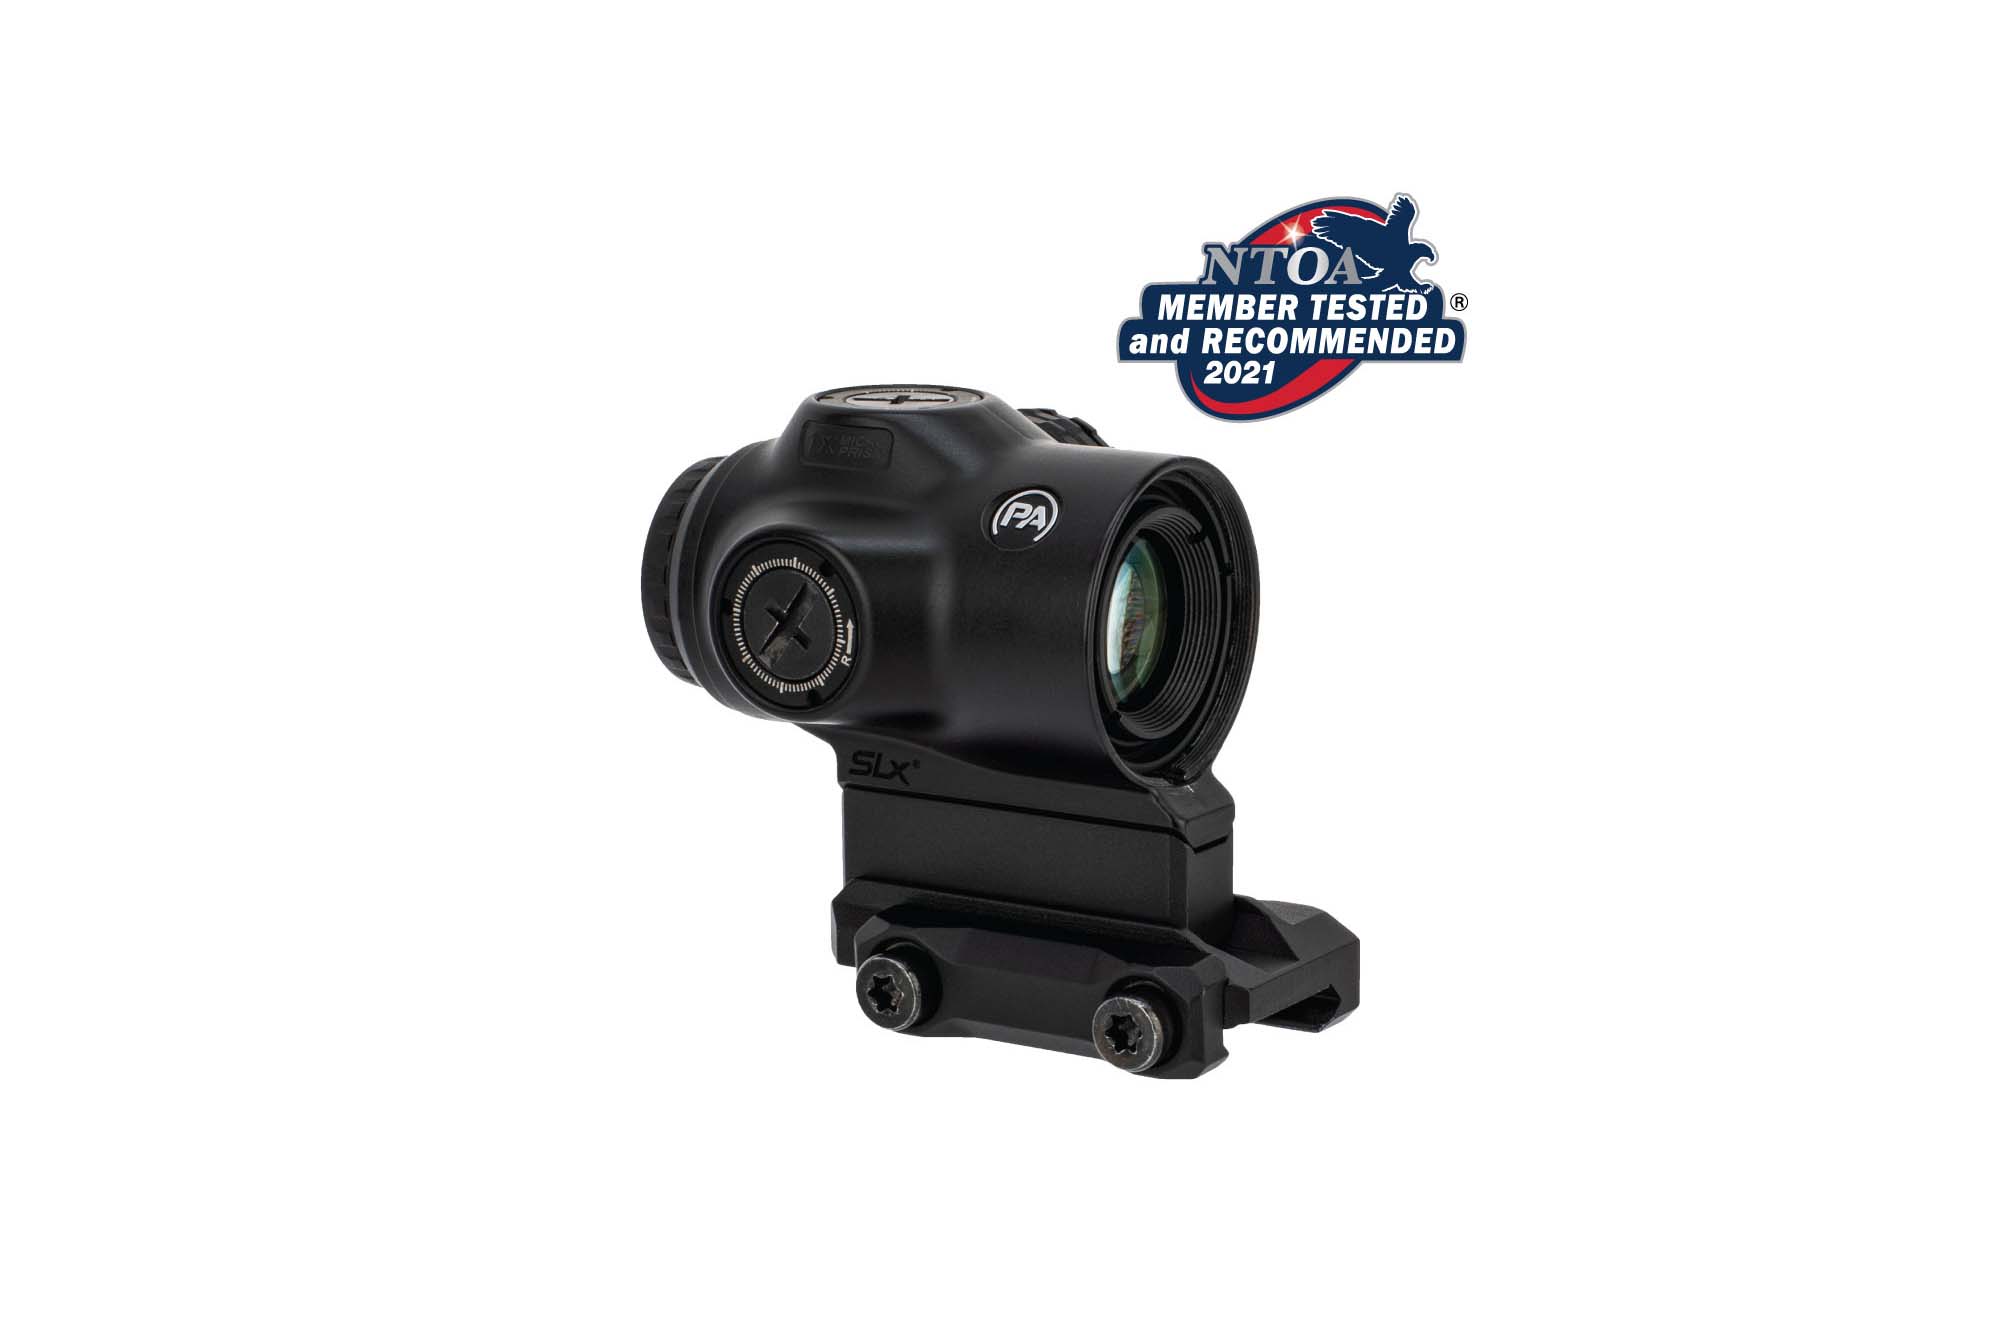 Primary Arms SLx 1X MicroPrism™ Scope - Red Illuminated ACSS